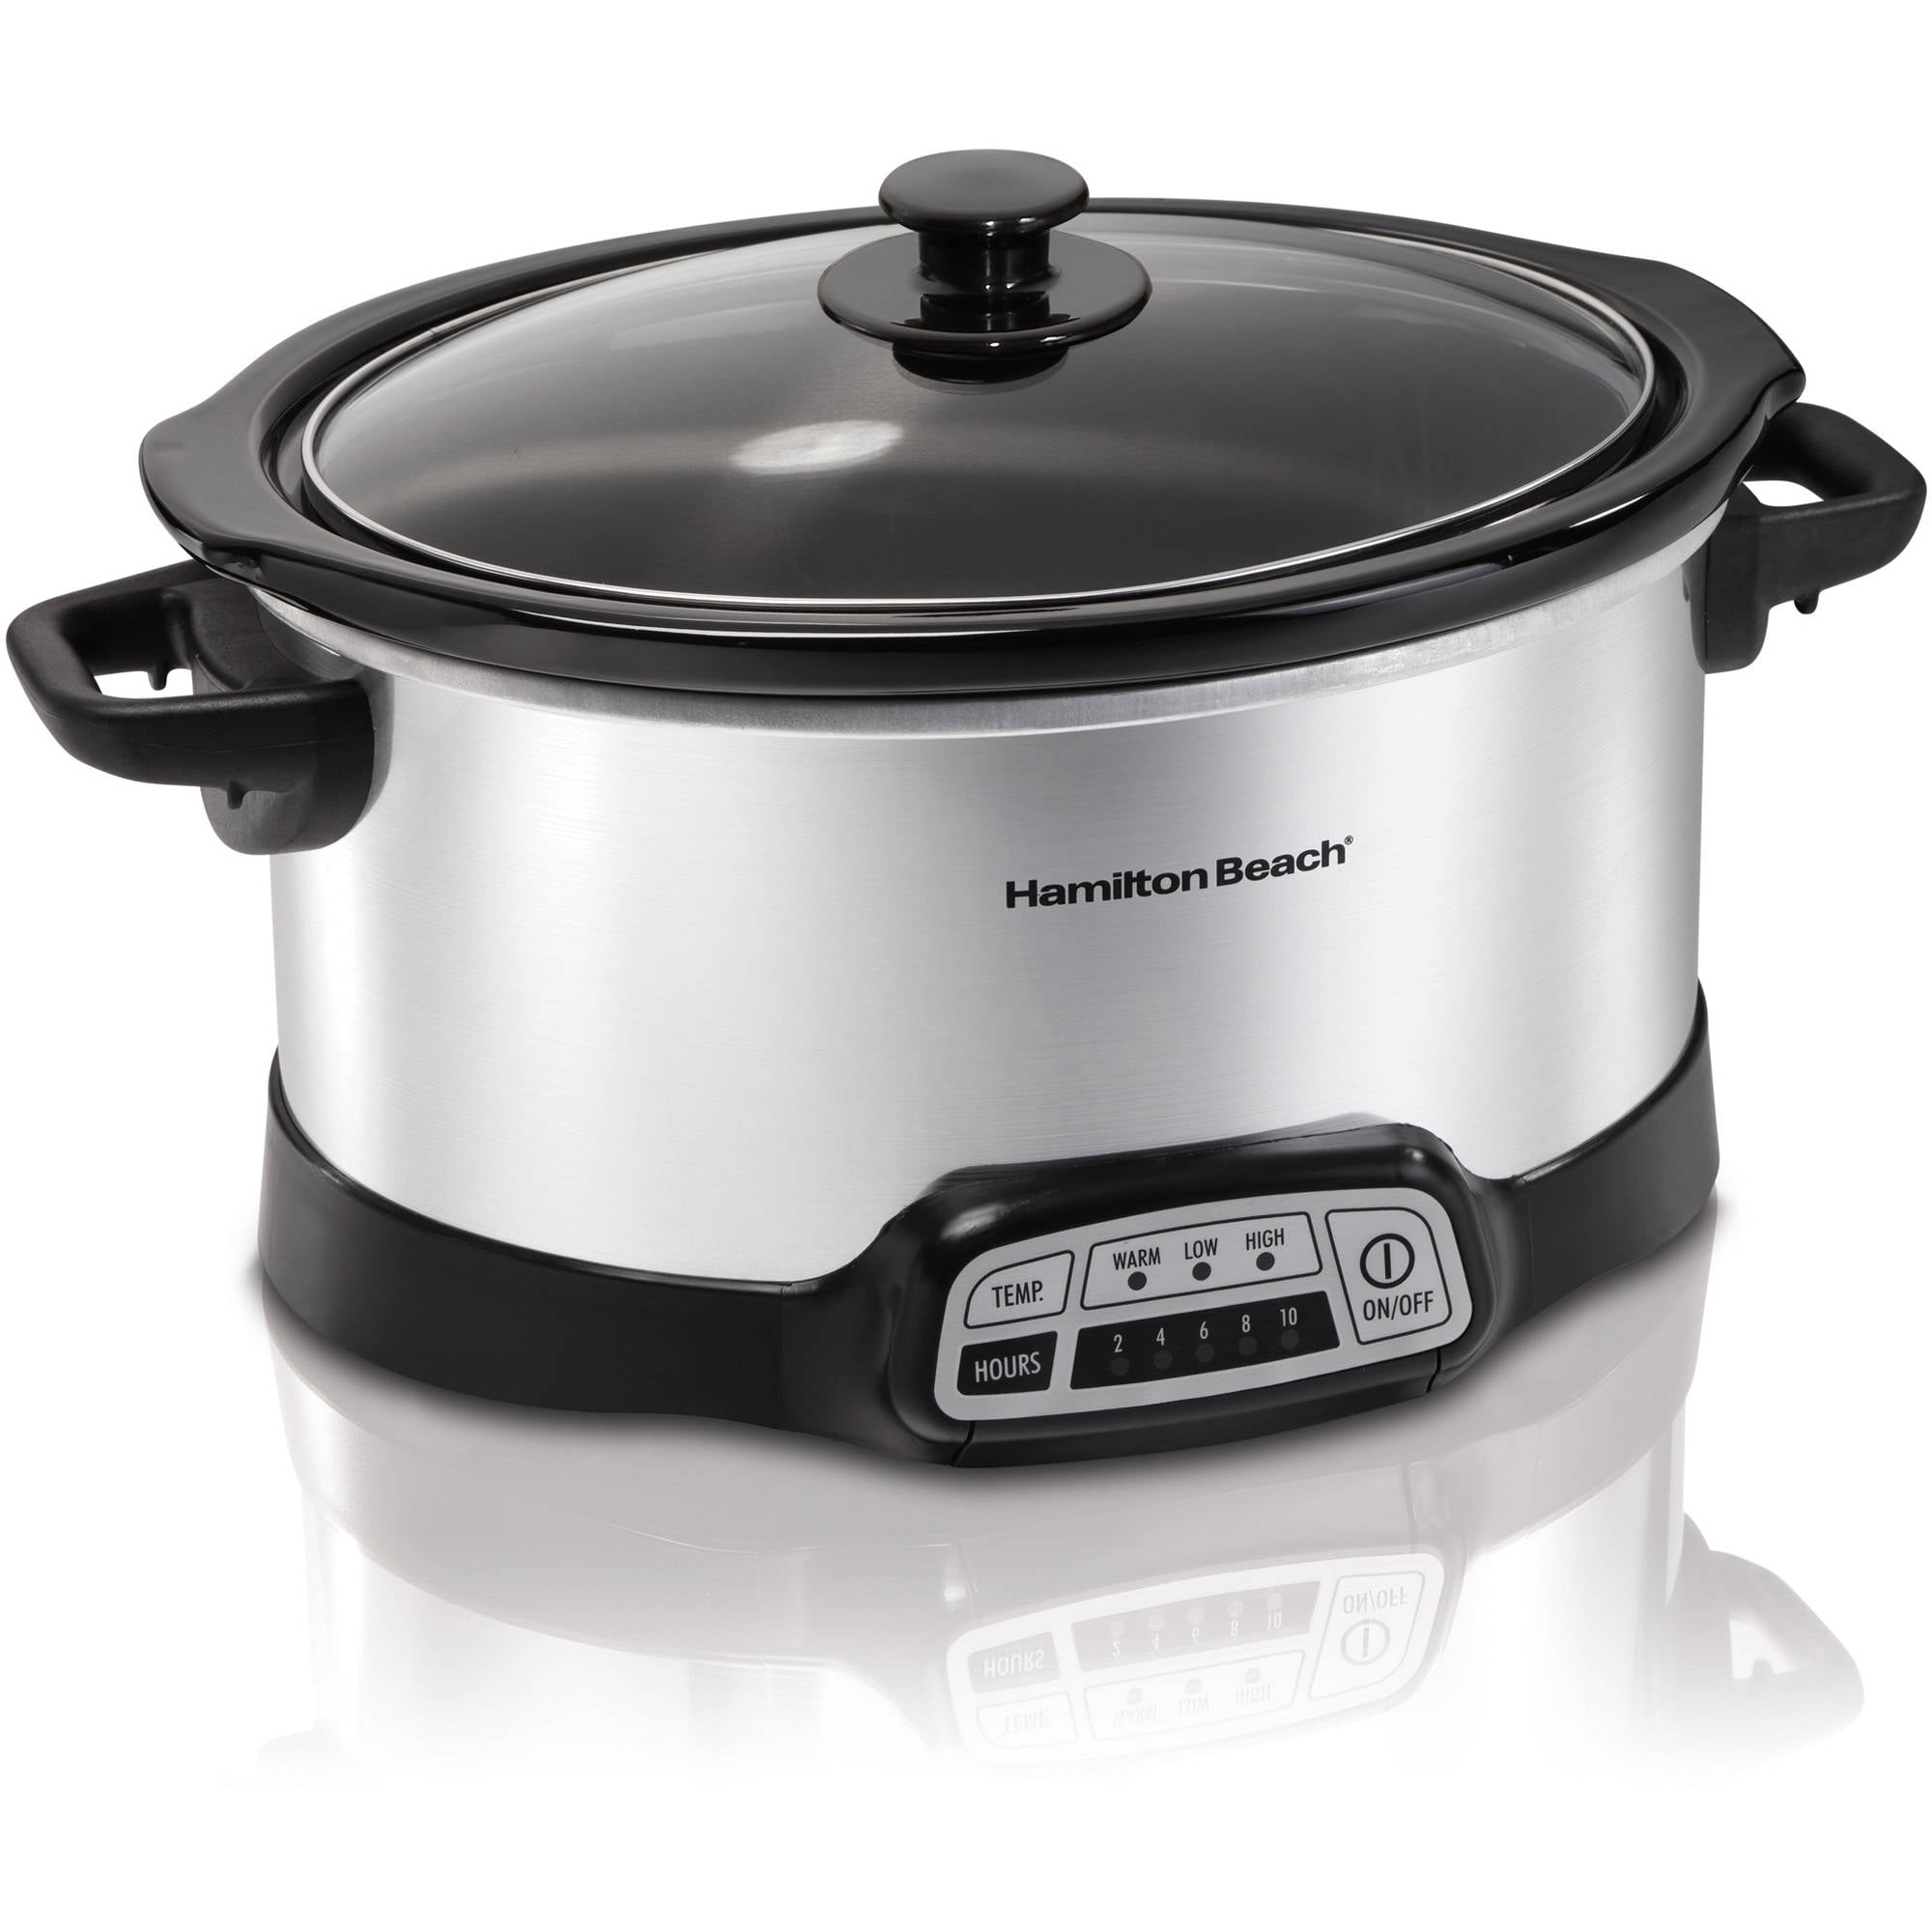 Stainless Steel 6 Quart Cook & Carry Programmable Slow Cooker with Digital Timer 